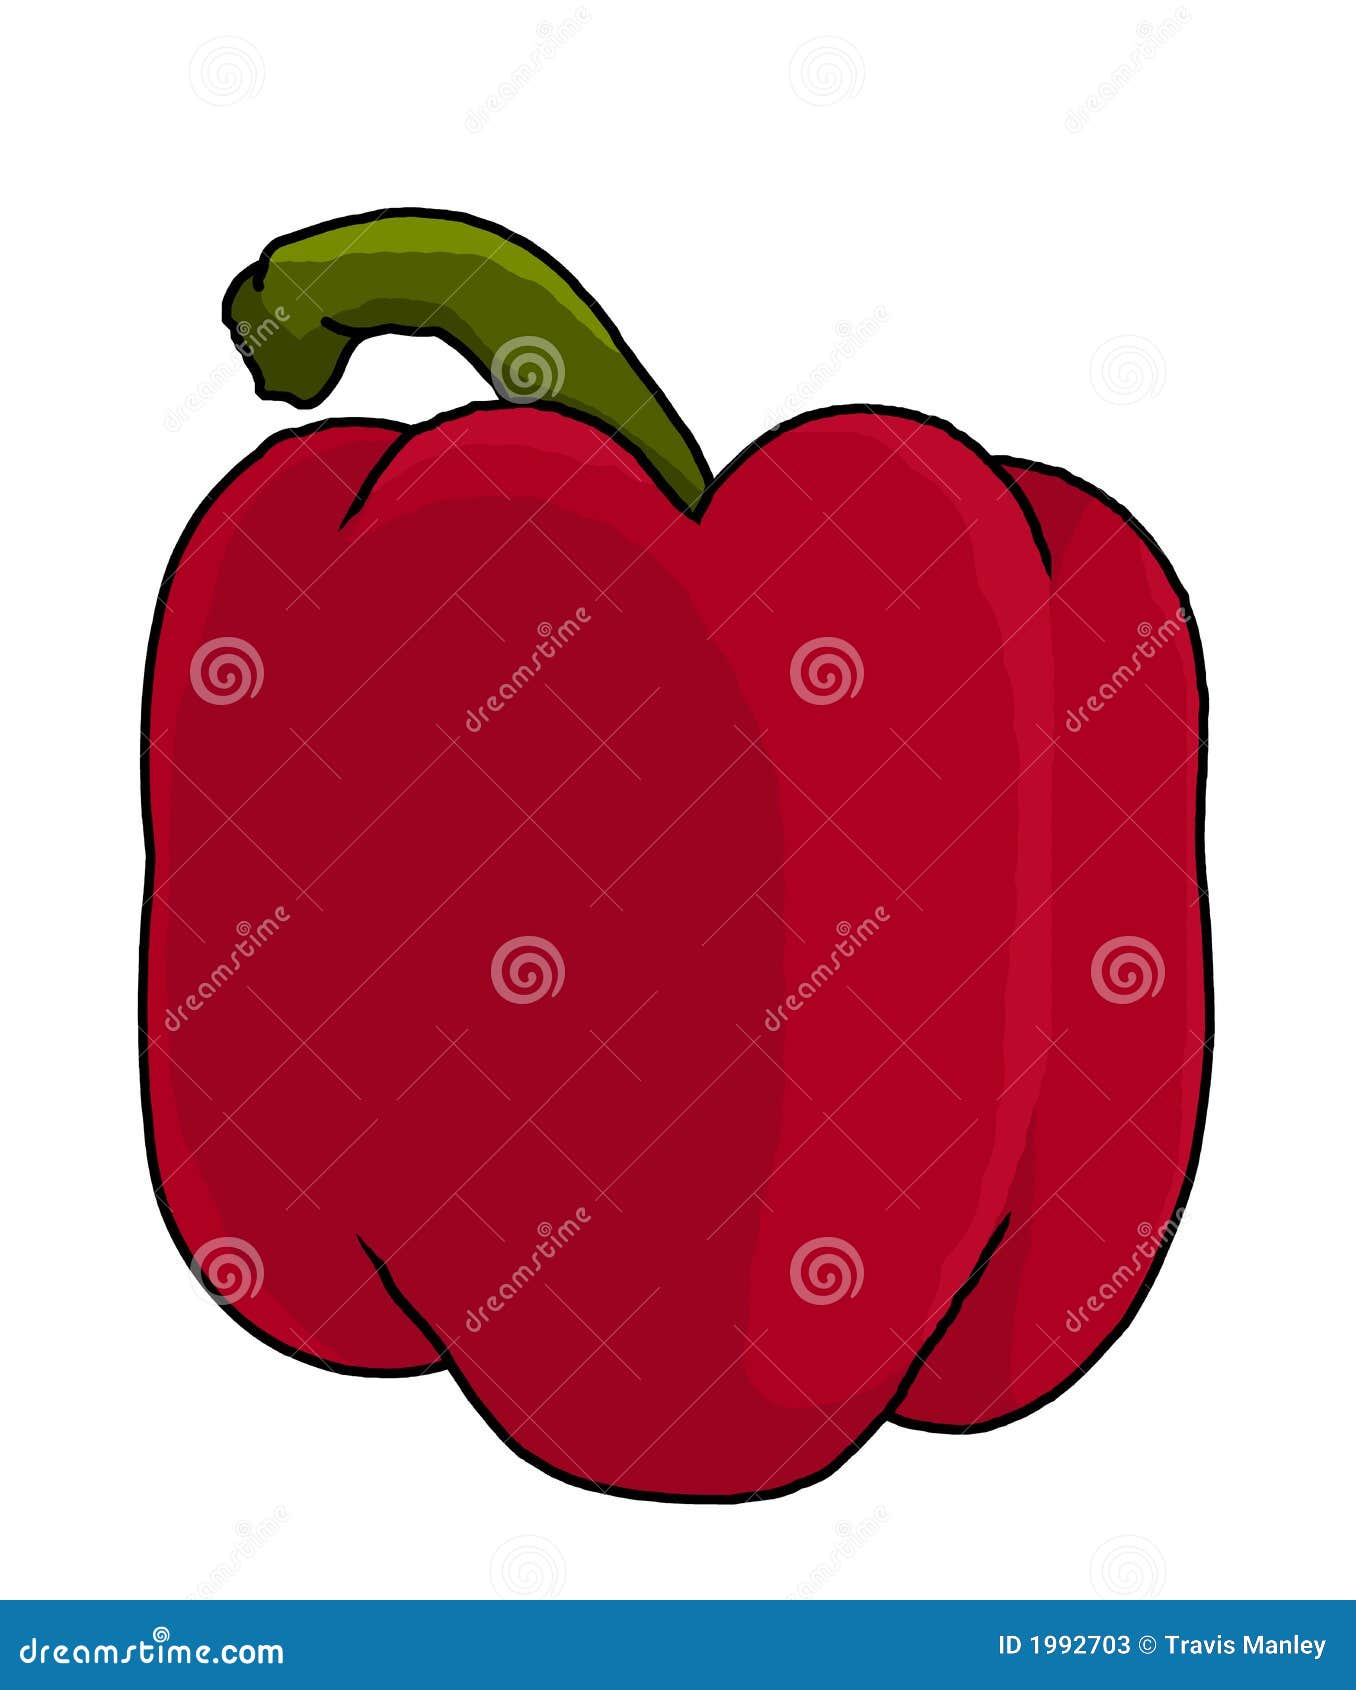 Red Bell Pepper Illustration Stock Photos - Image: 19927031192 x 1300